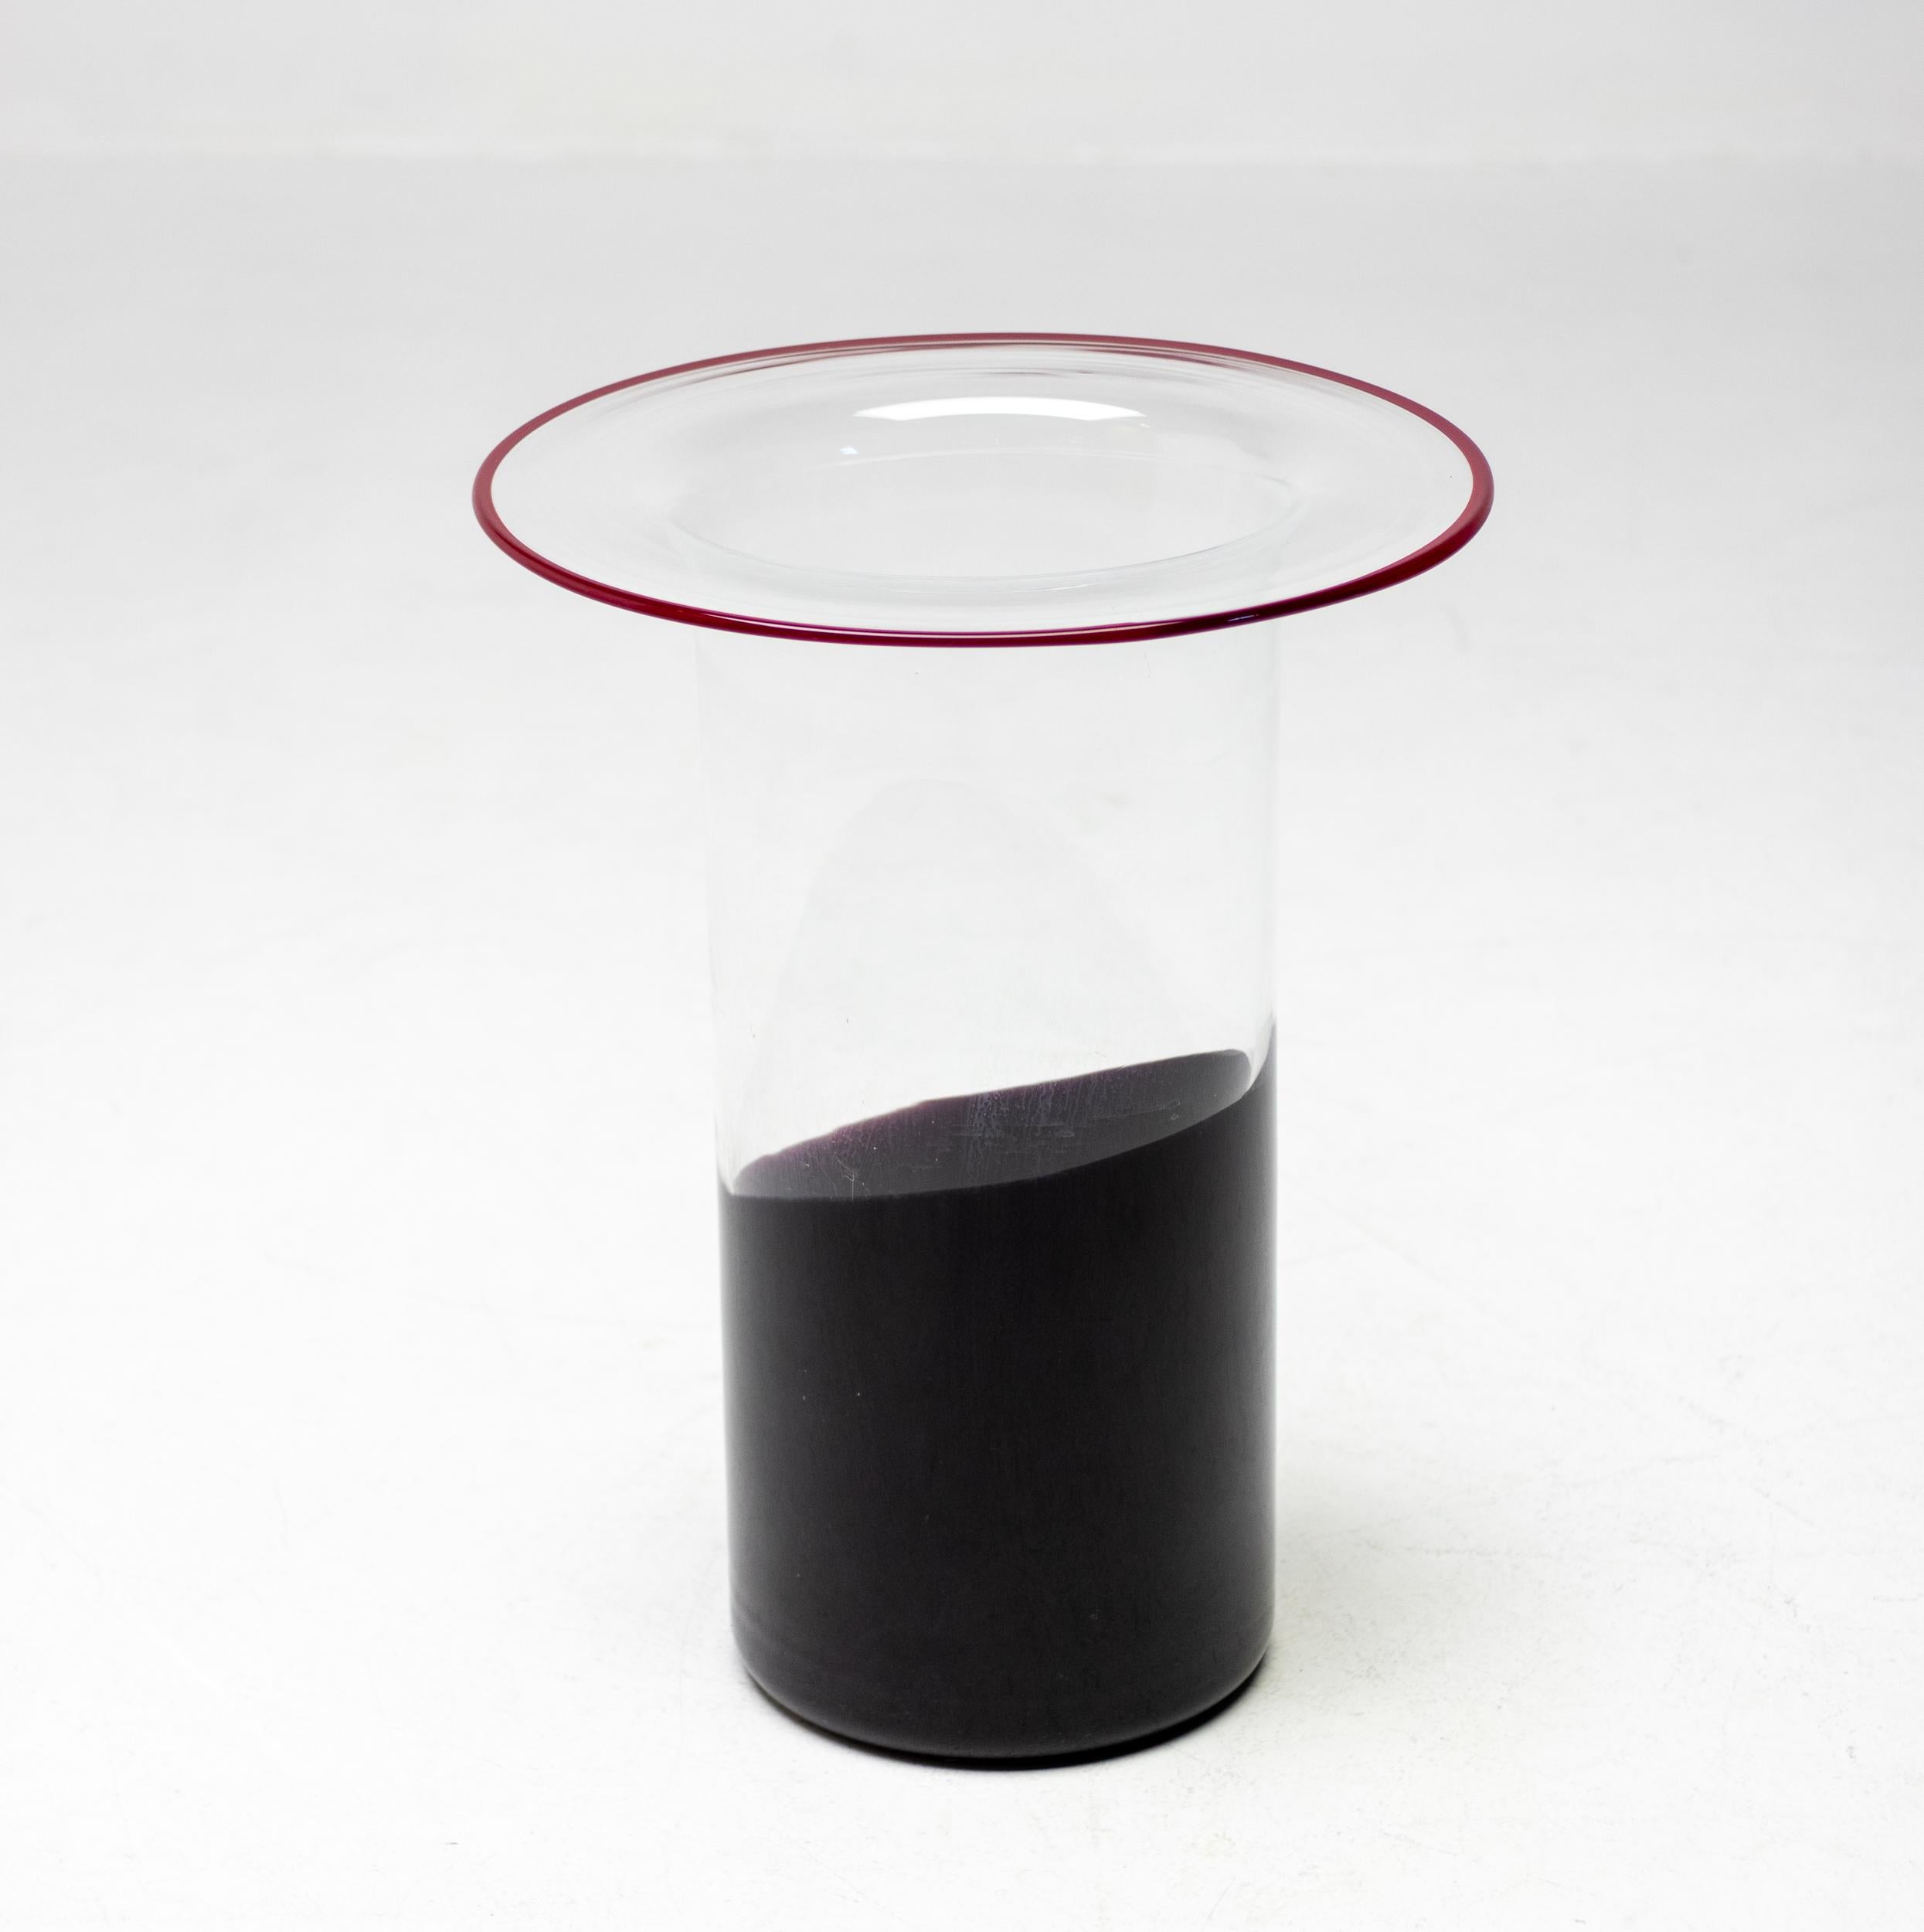 Beautiful Vistosi cylinder hat shaped vase in clear glass with partial black glass at the bottom and a Vistosi trademark red glass edge. Designer Alessandro Pianon started working for Vistosi in 1956 and founded his own design office in 1962.